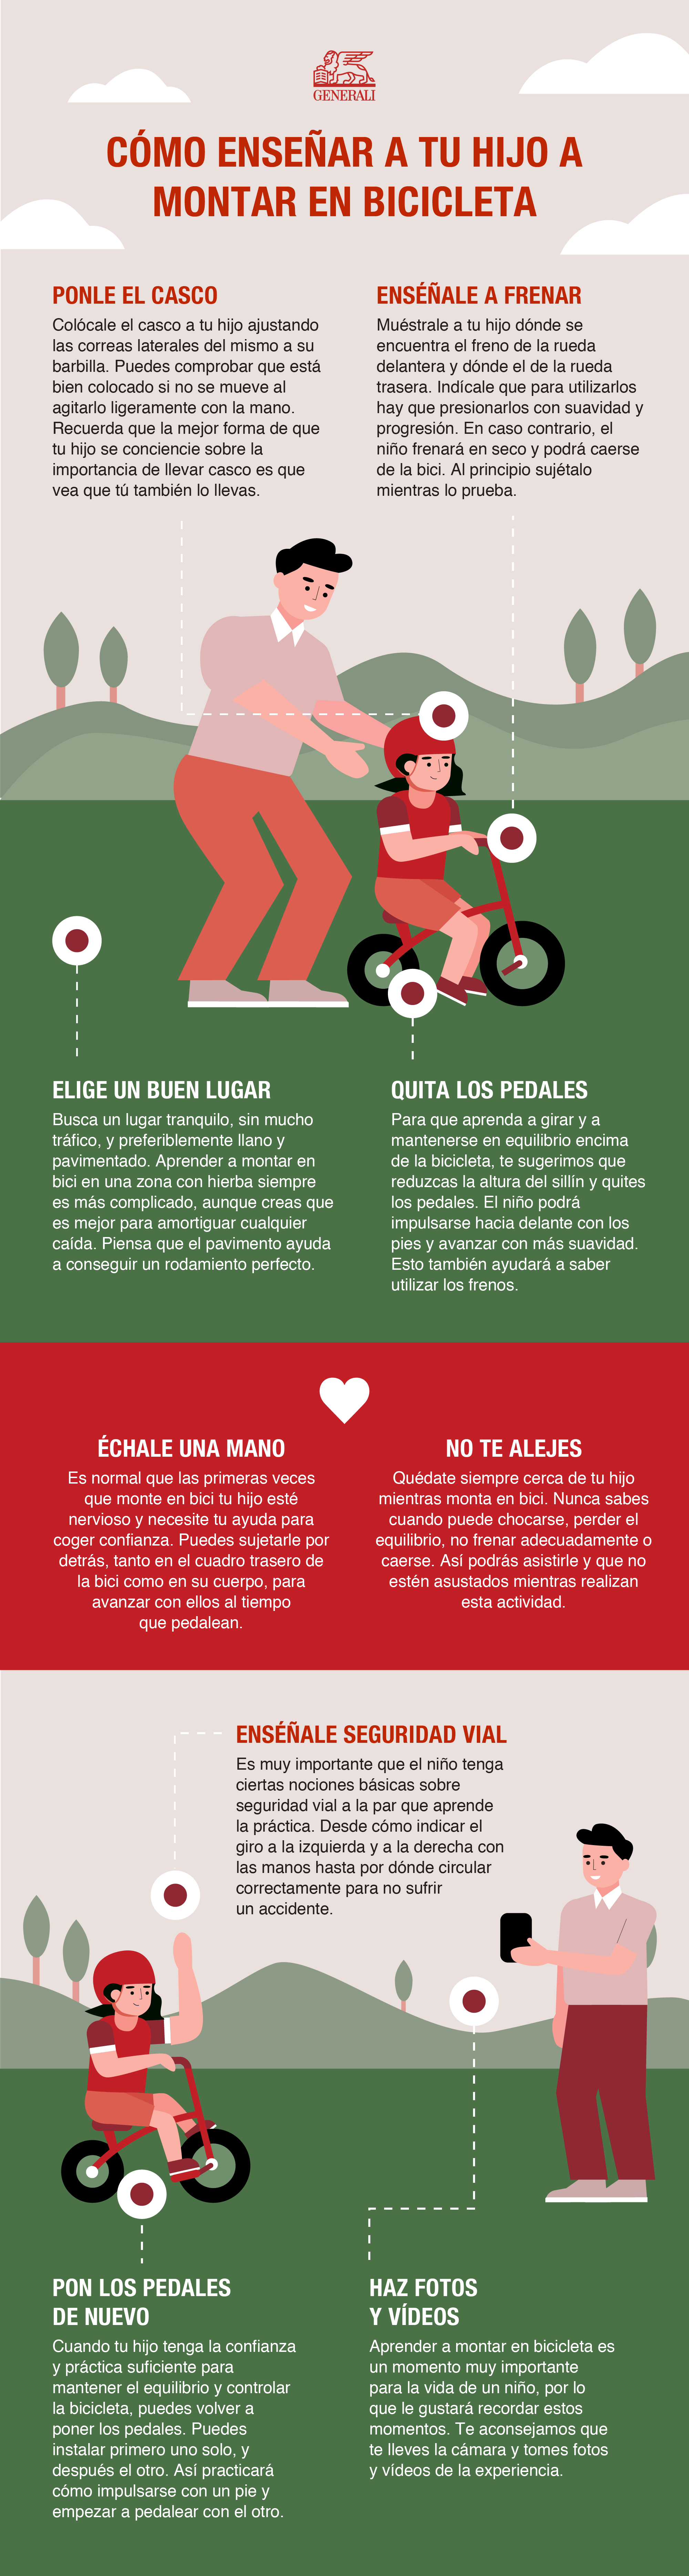 Generali_Spain_How to Teach Your Child to Ride a Bike_03.04.2021.png